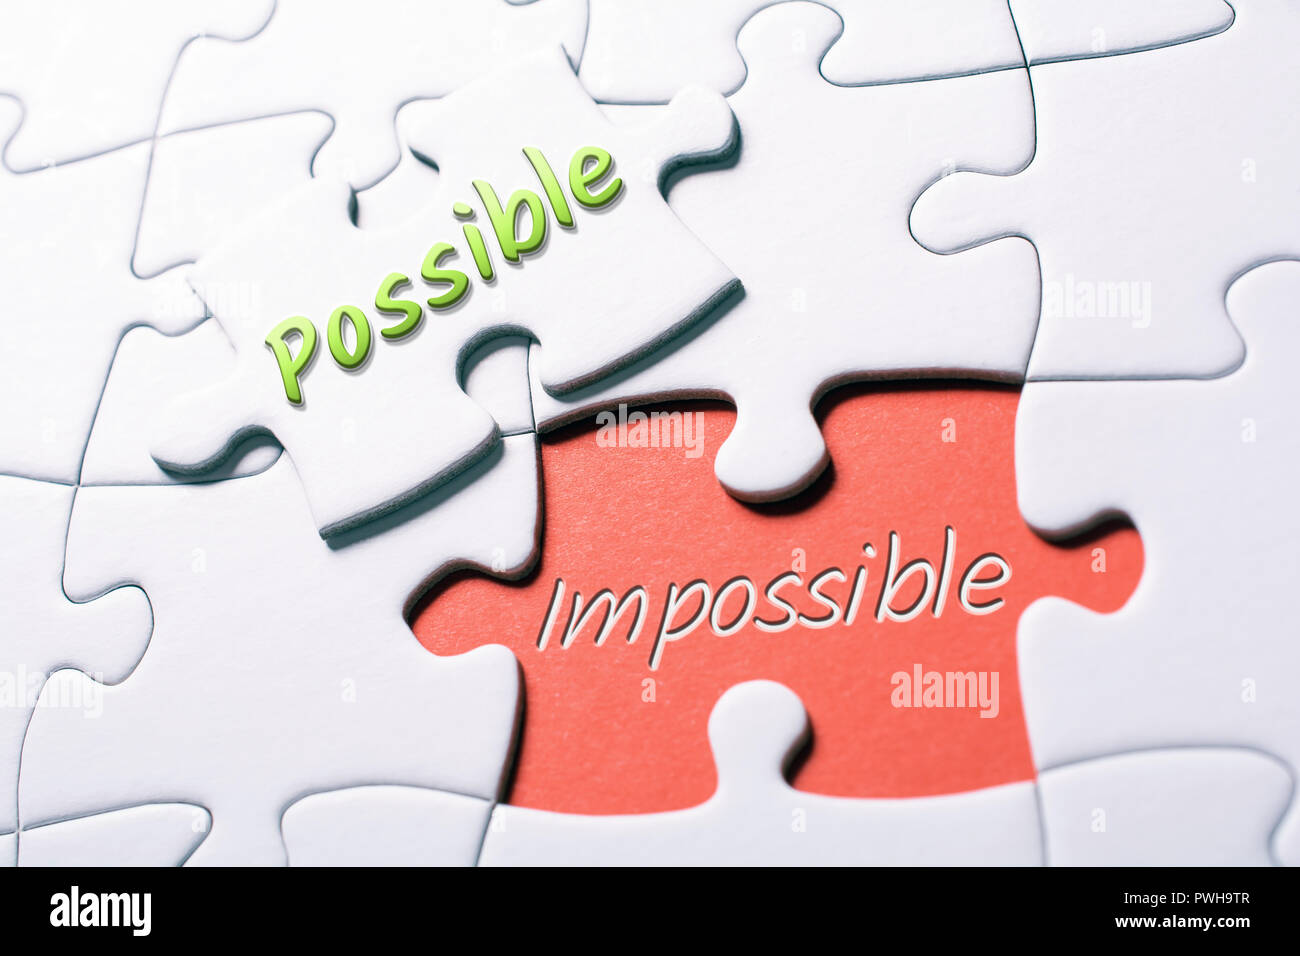 The Words Possible And Impossible In Missing Piece Jigsaw Puzzle Stock Photo